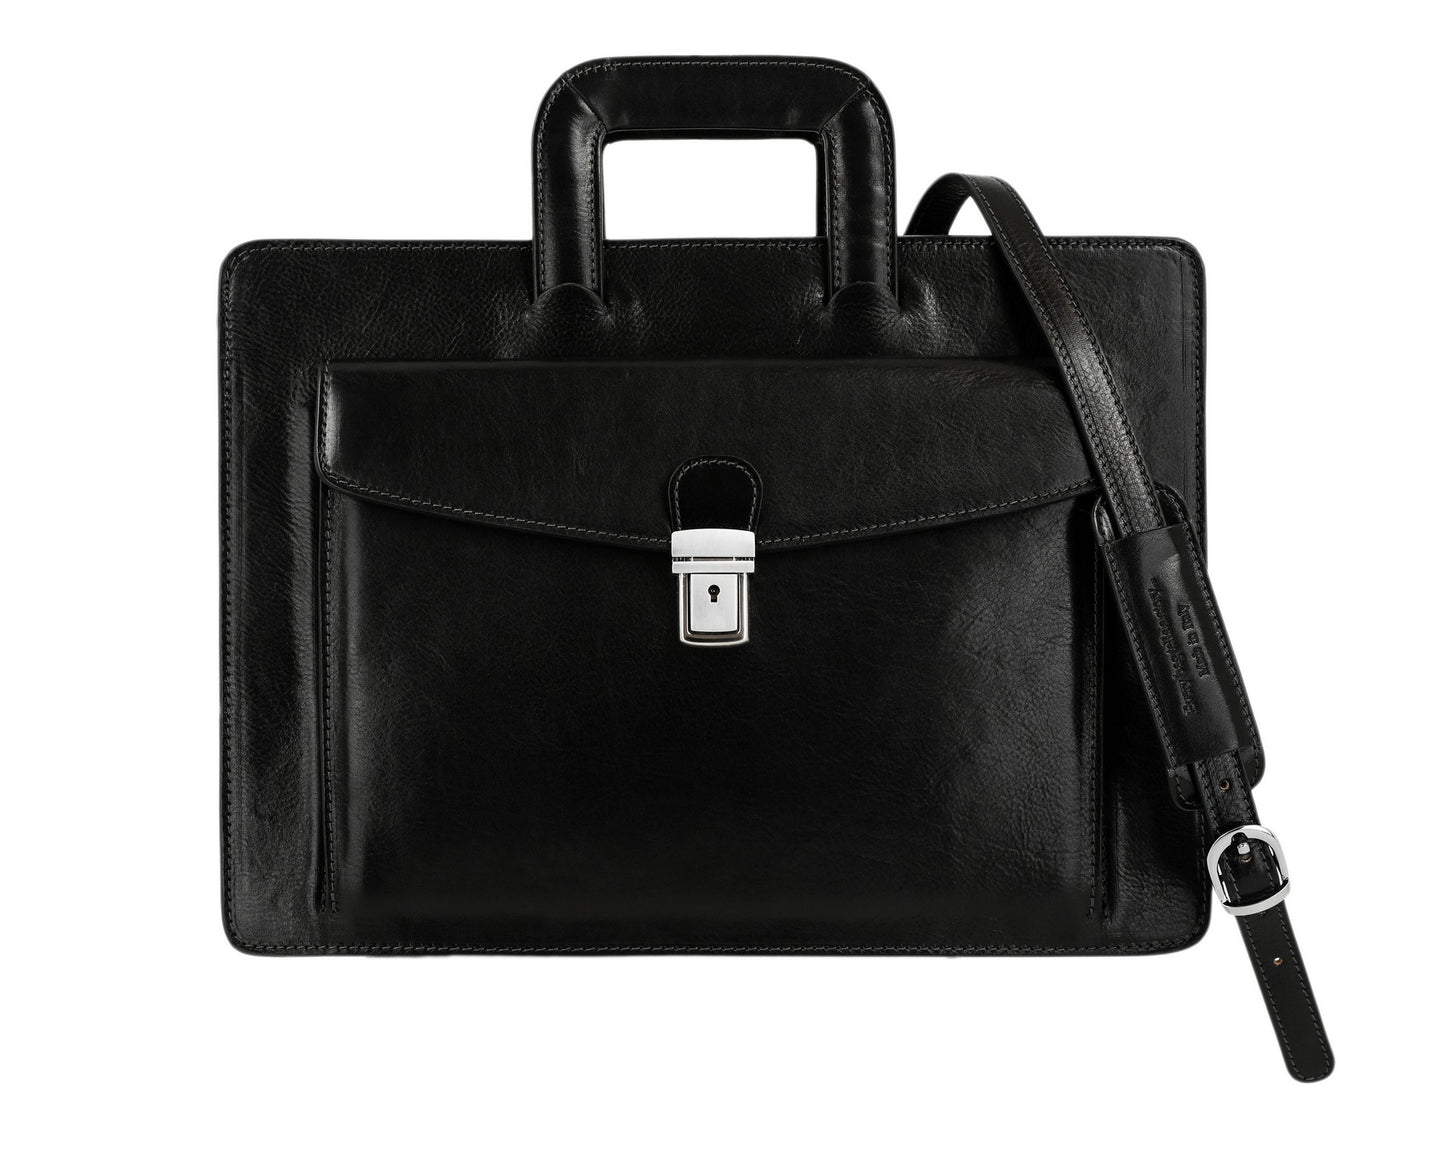 Leather Briefcase - The Tempest